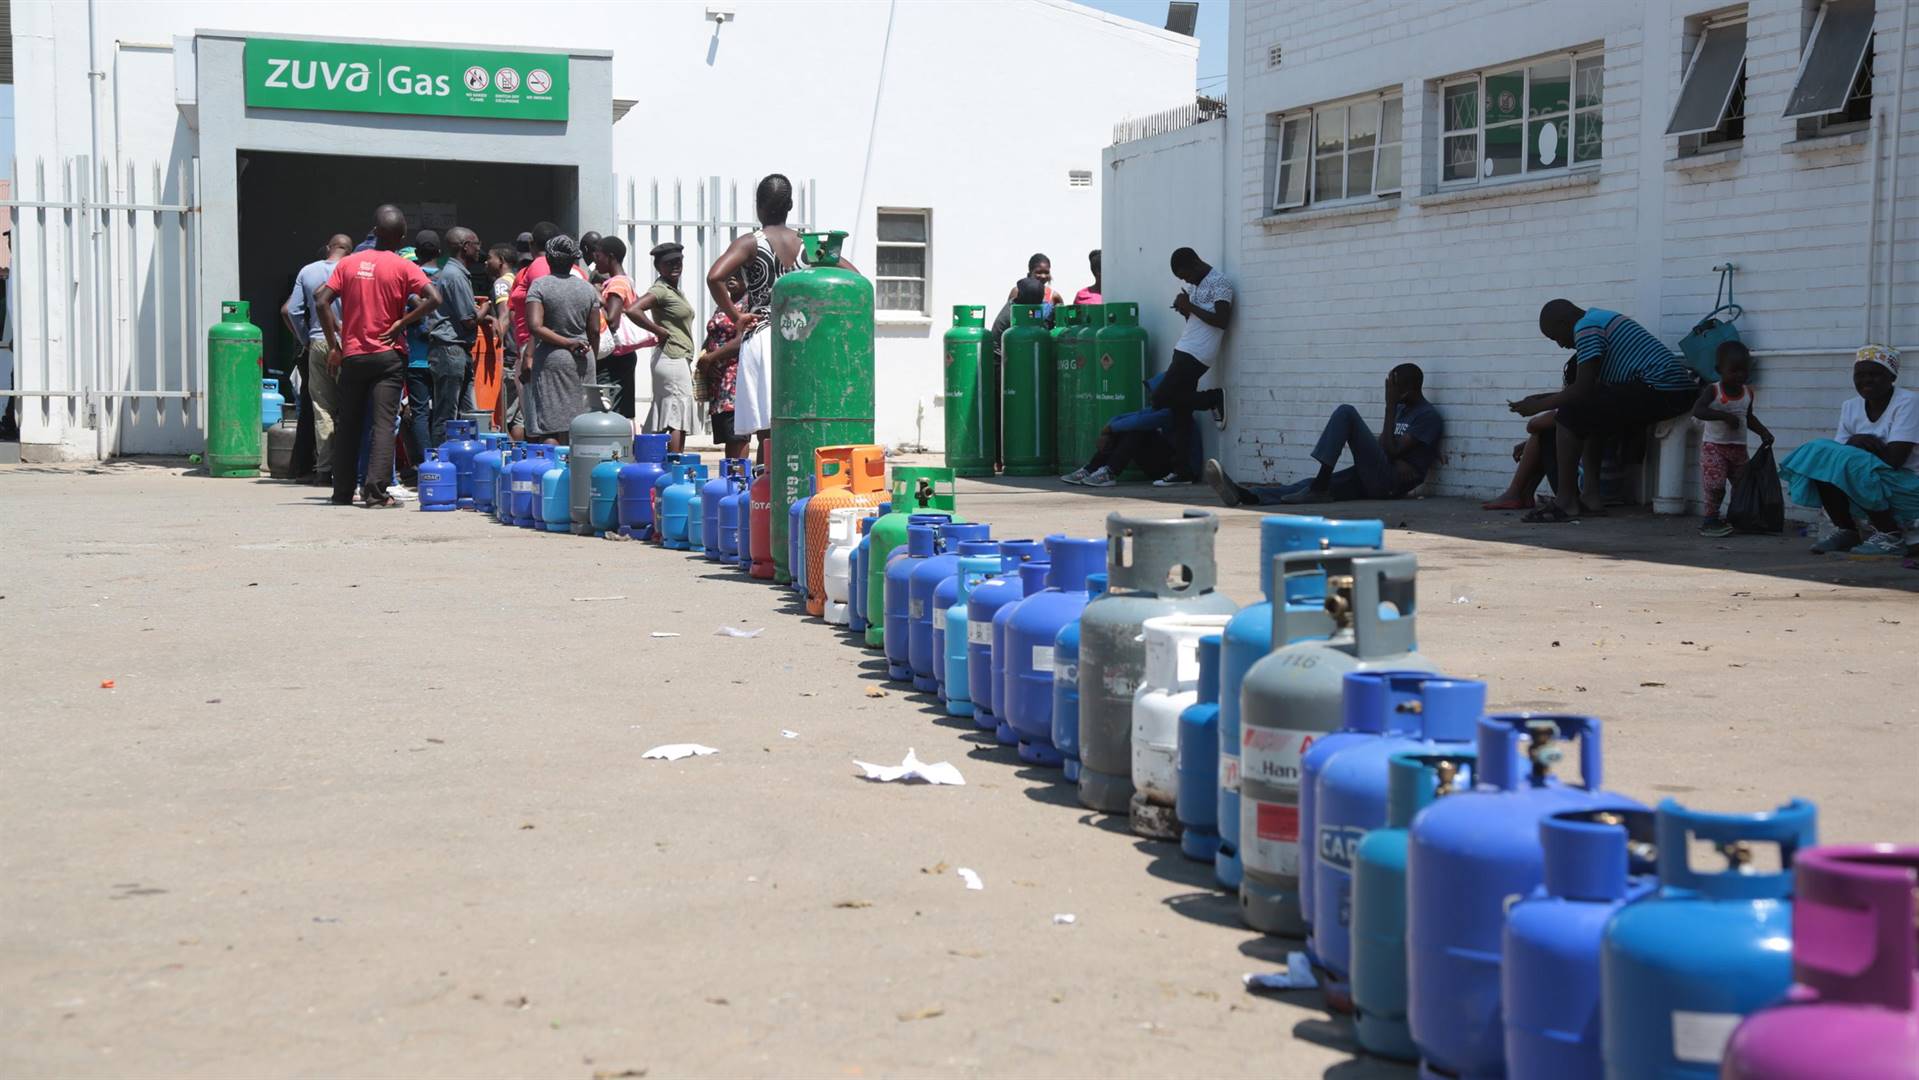 Zimbabweans struggling to cope with extended load shedding are turning to alternative energy sources such as gas